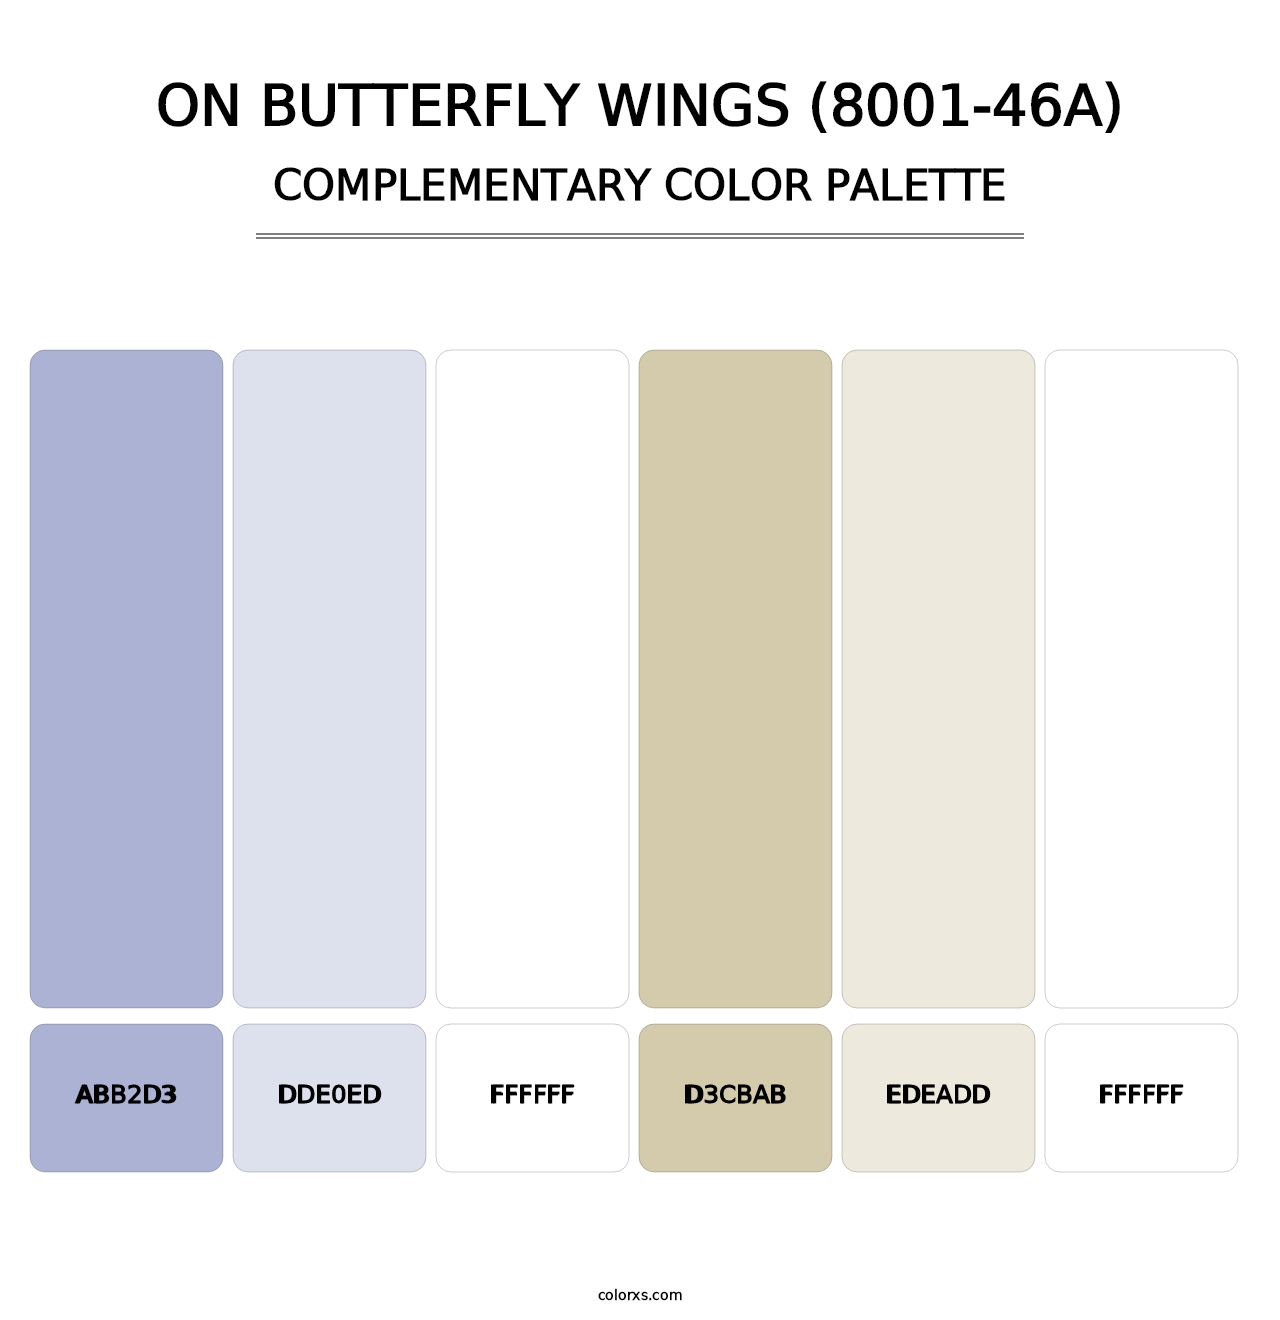 On Butterfly Wings (8001-46A) - Complementary Color Palette